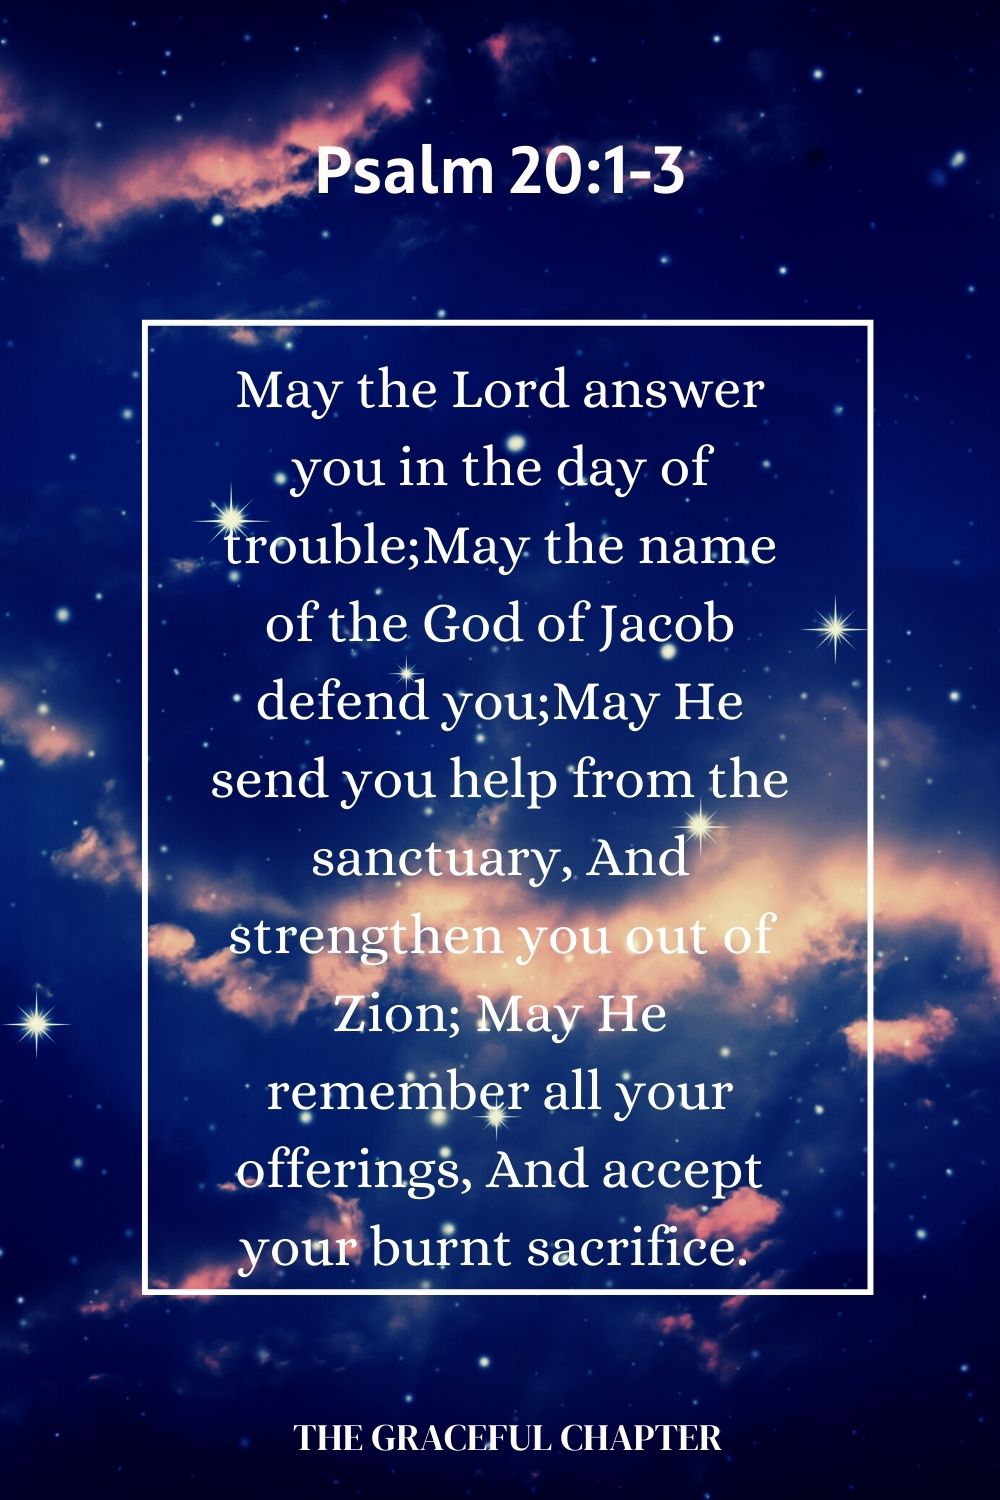 May the Lord answer you in the day of trouble; May the name of the God of Jacob defend you; May He send you help from the sanctuary, And strengthen you out of Zion; May He remember all your offerings, And accept your burnt sacrifice.  Psalm 20:1-3